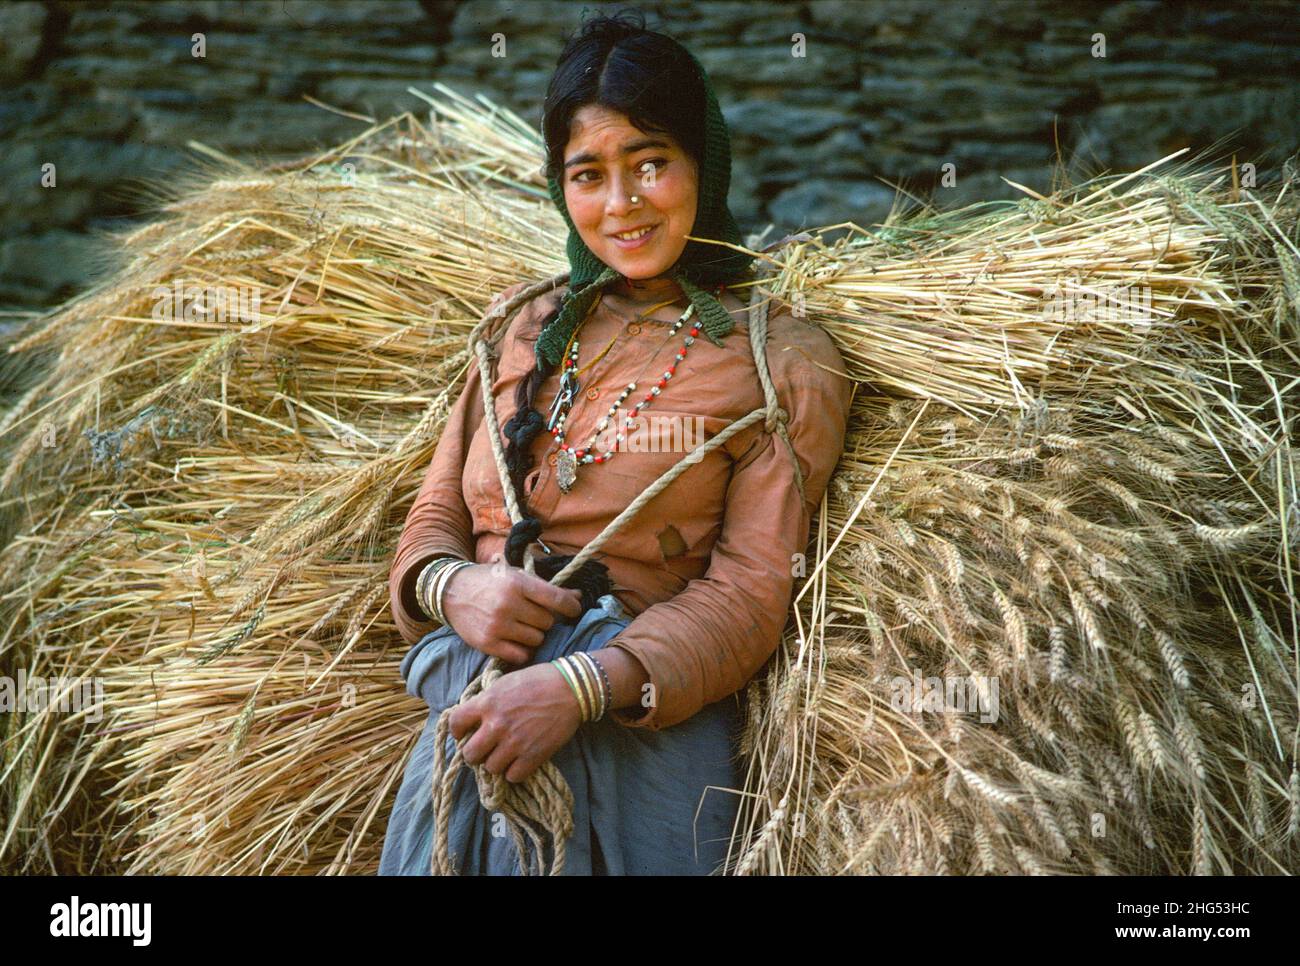 Shy and smiling young girl from the Jaunsari tribe resting whilst carrying sheaves of barley at harvest time. Uttarkashi, Garwhal Hima, N. India Stock Photo